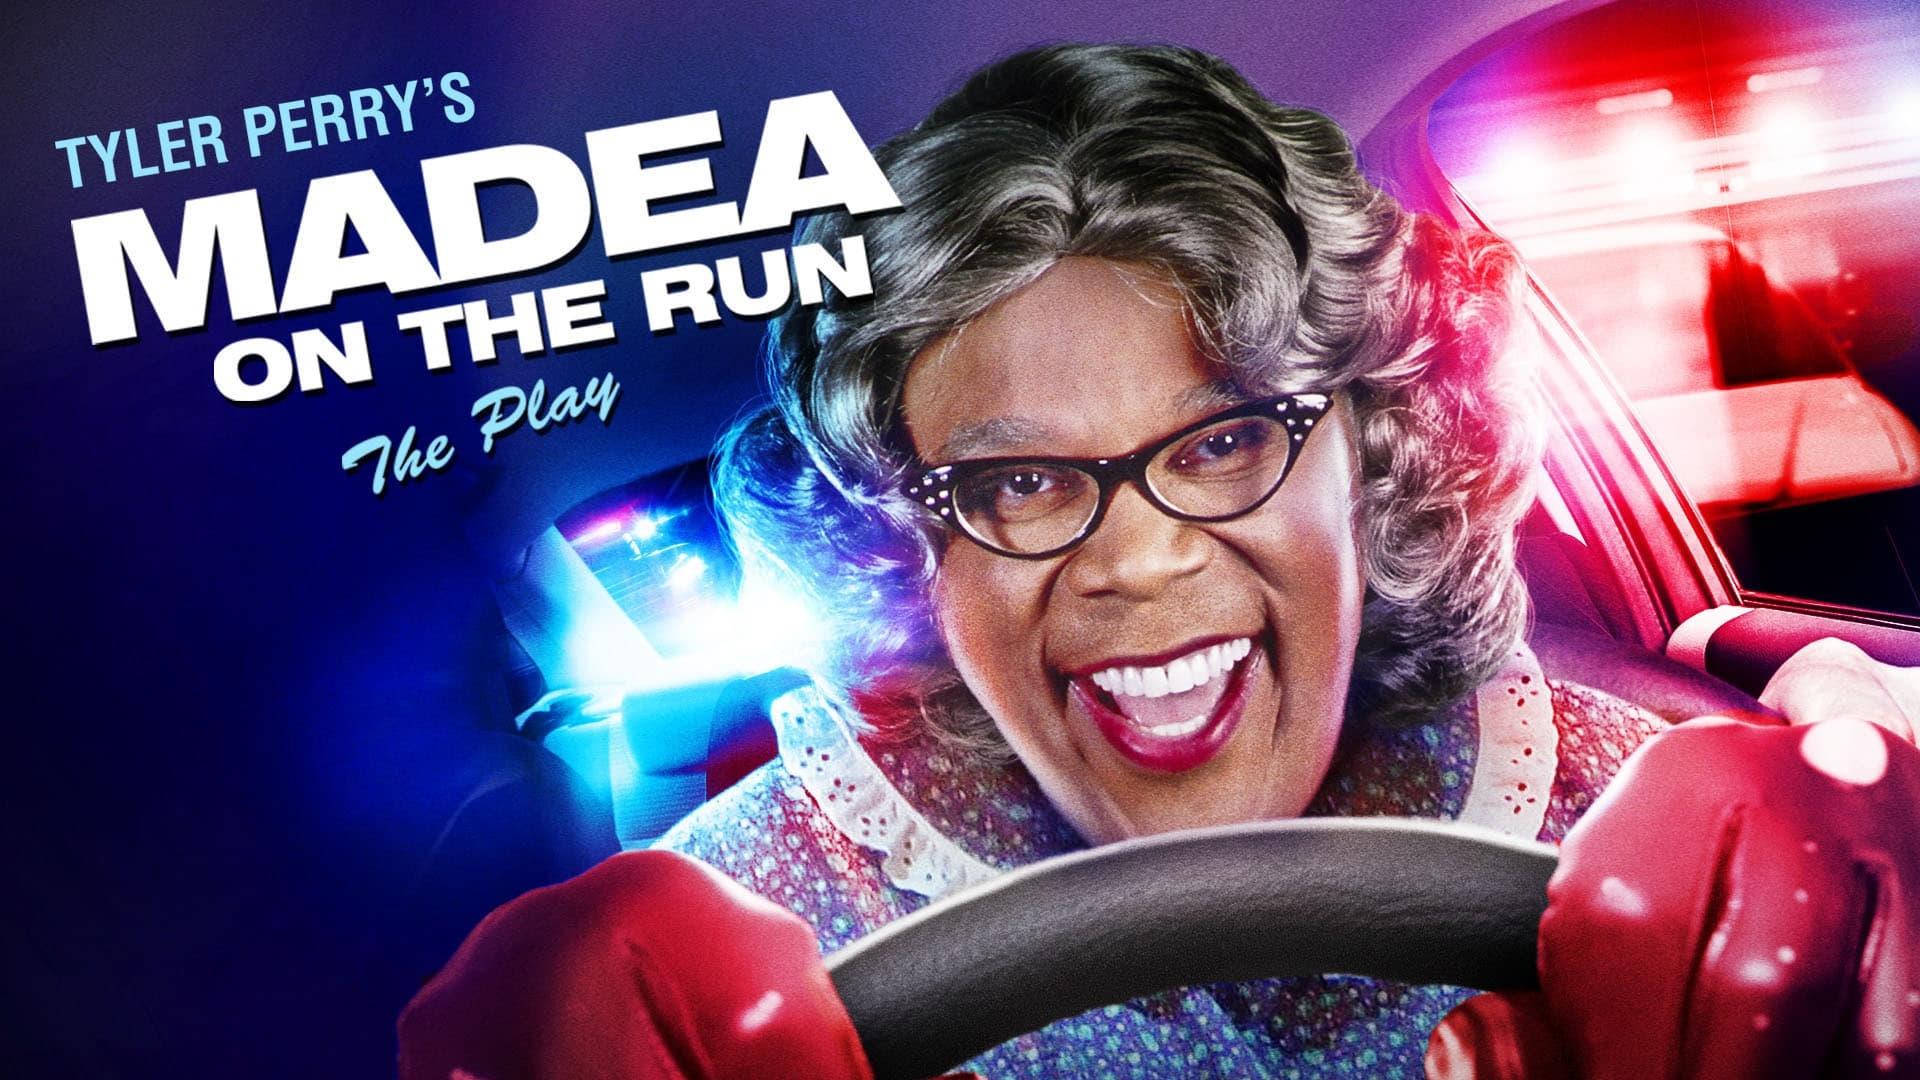 Tyler Perry's Madea on the Run - The Play backdrop